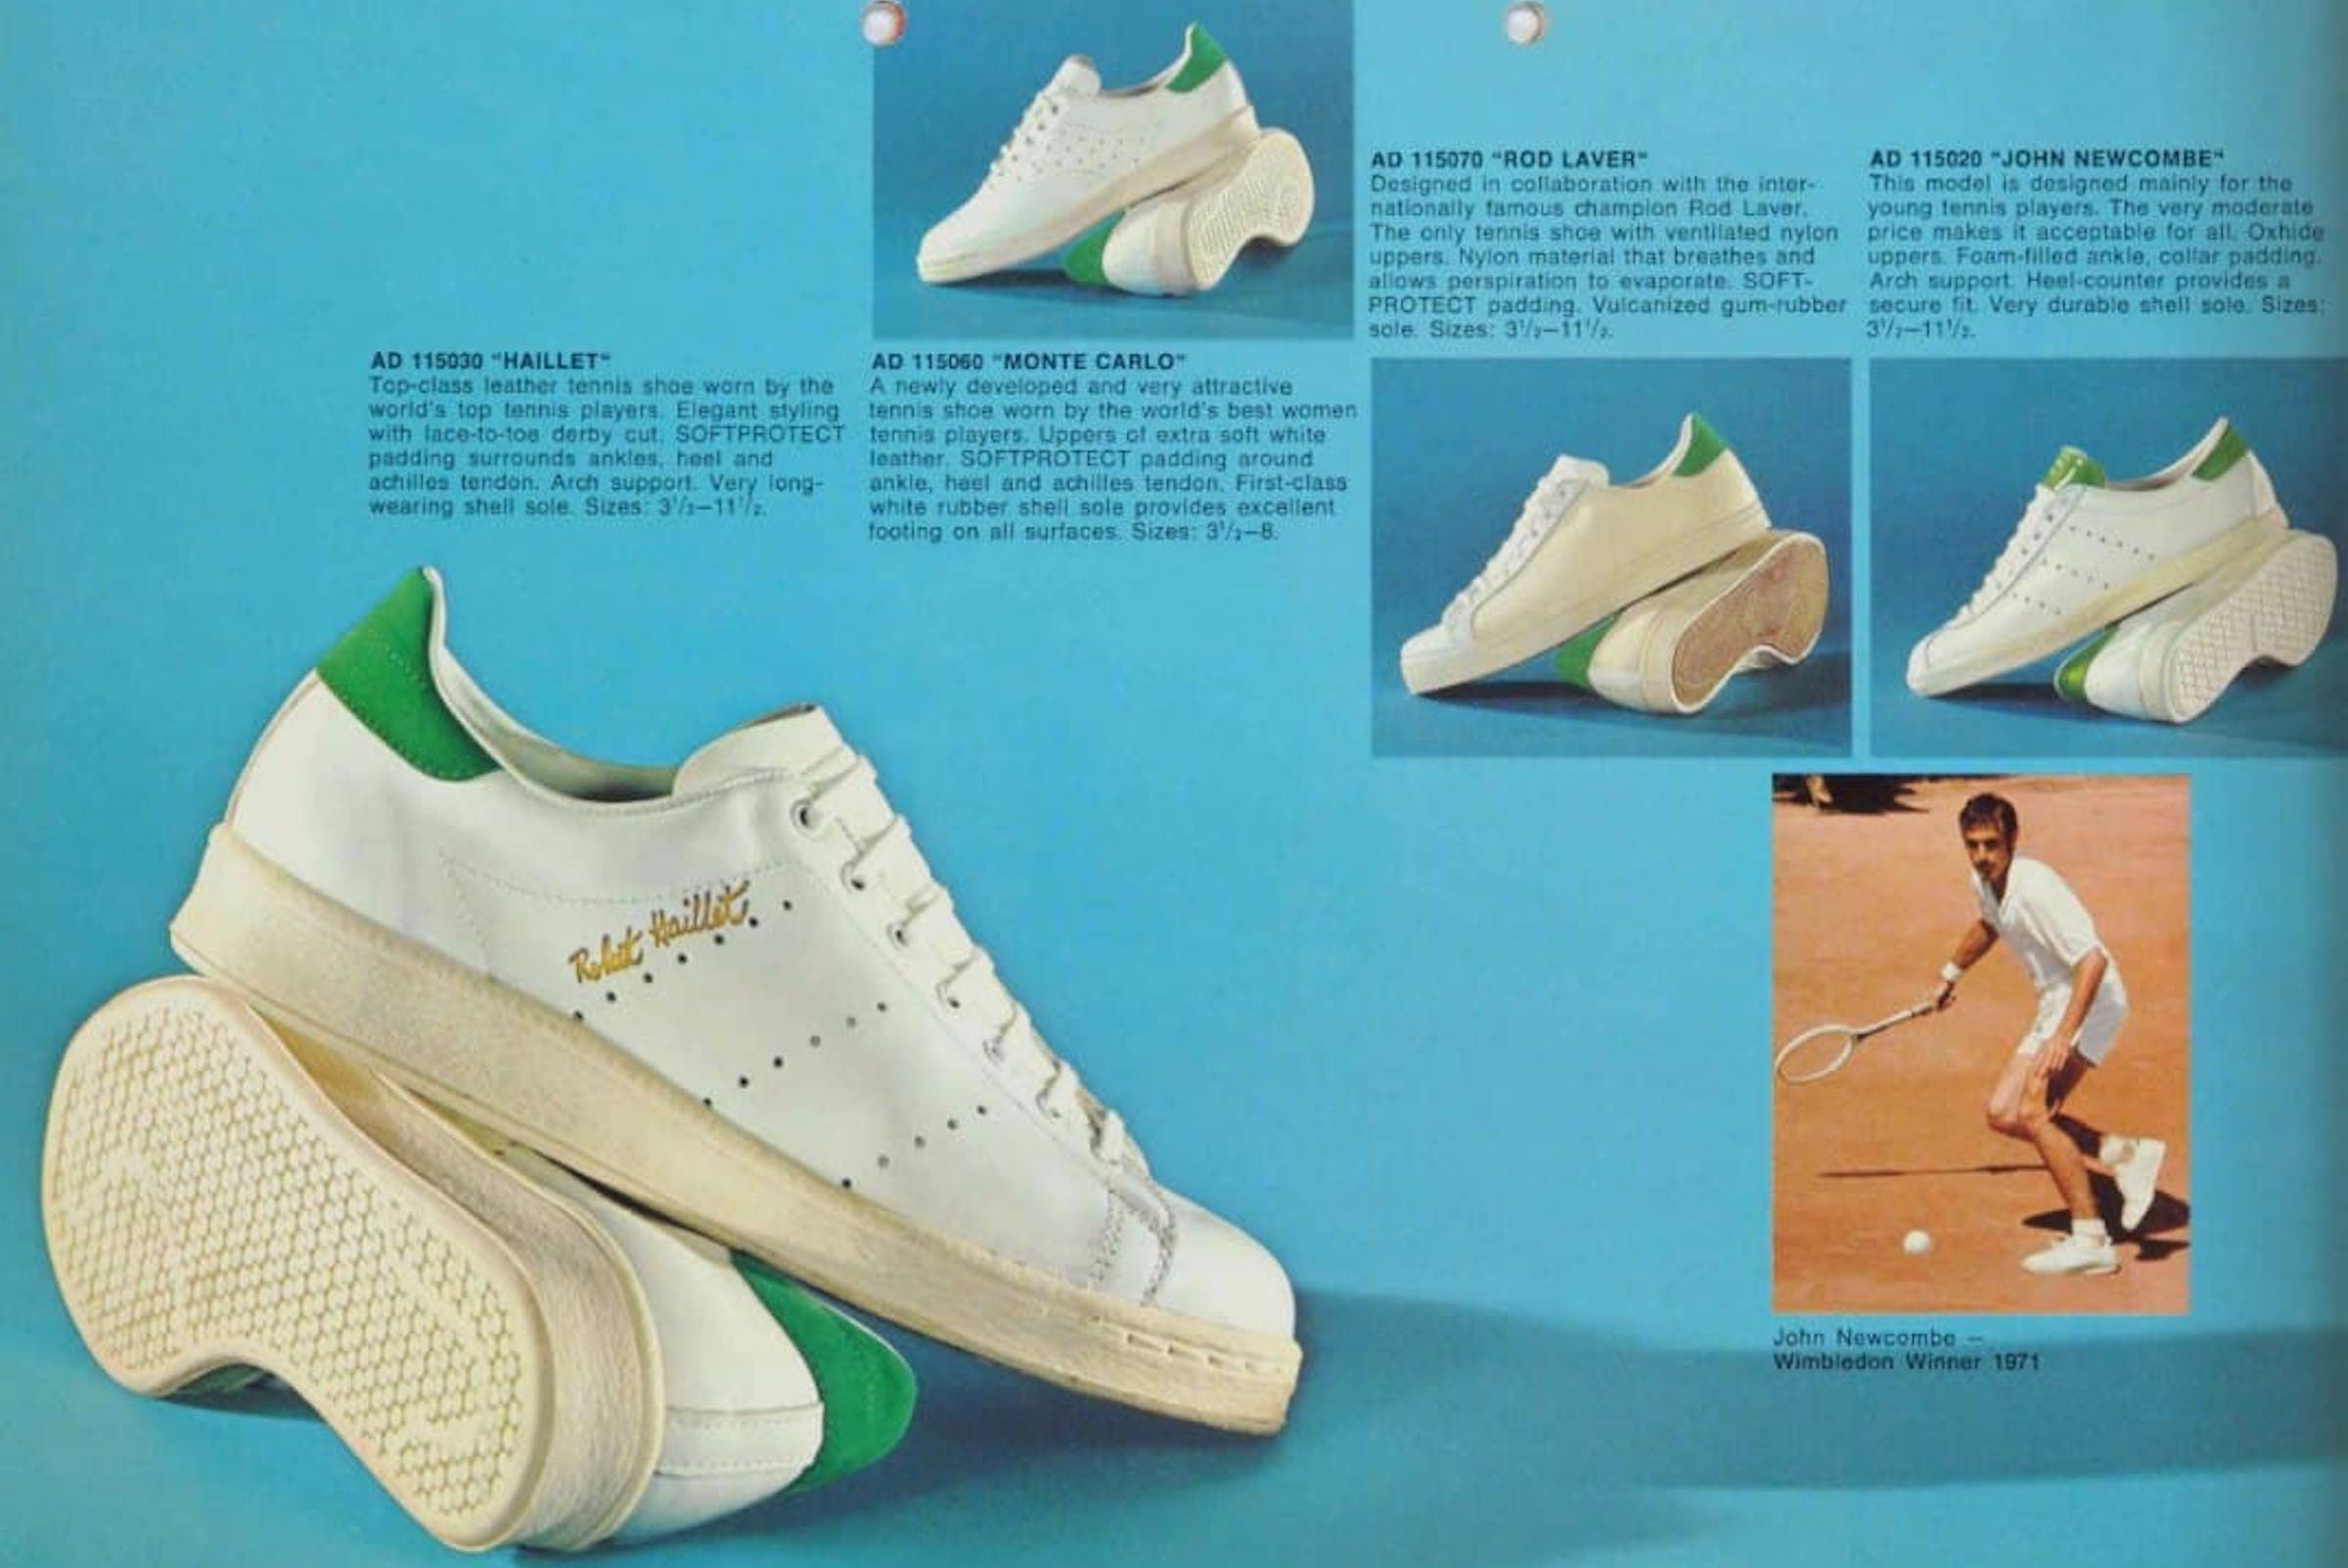 A New Book Called Stan Smith: Some People Think I'm a Shoe Is Out